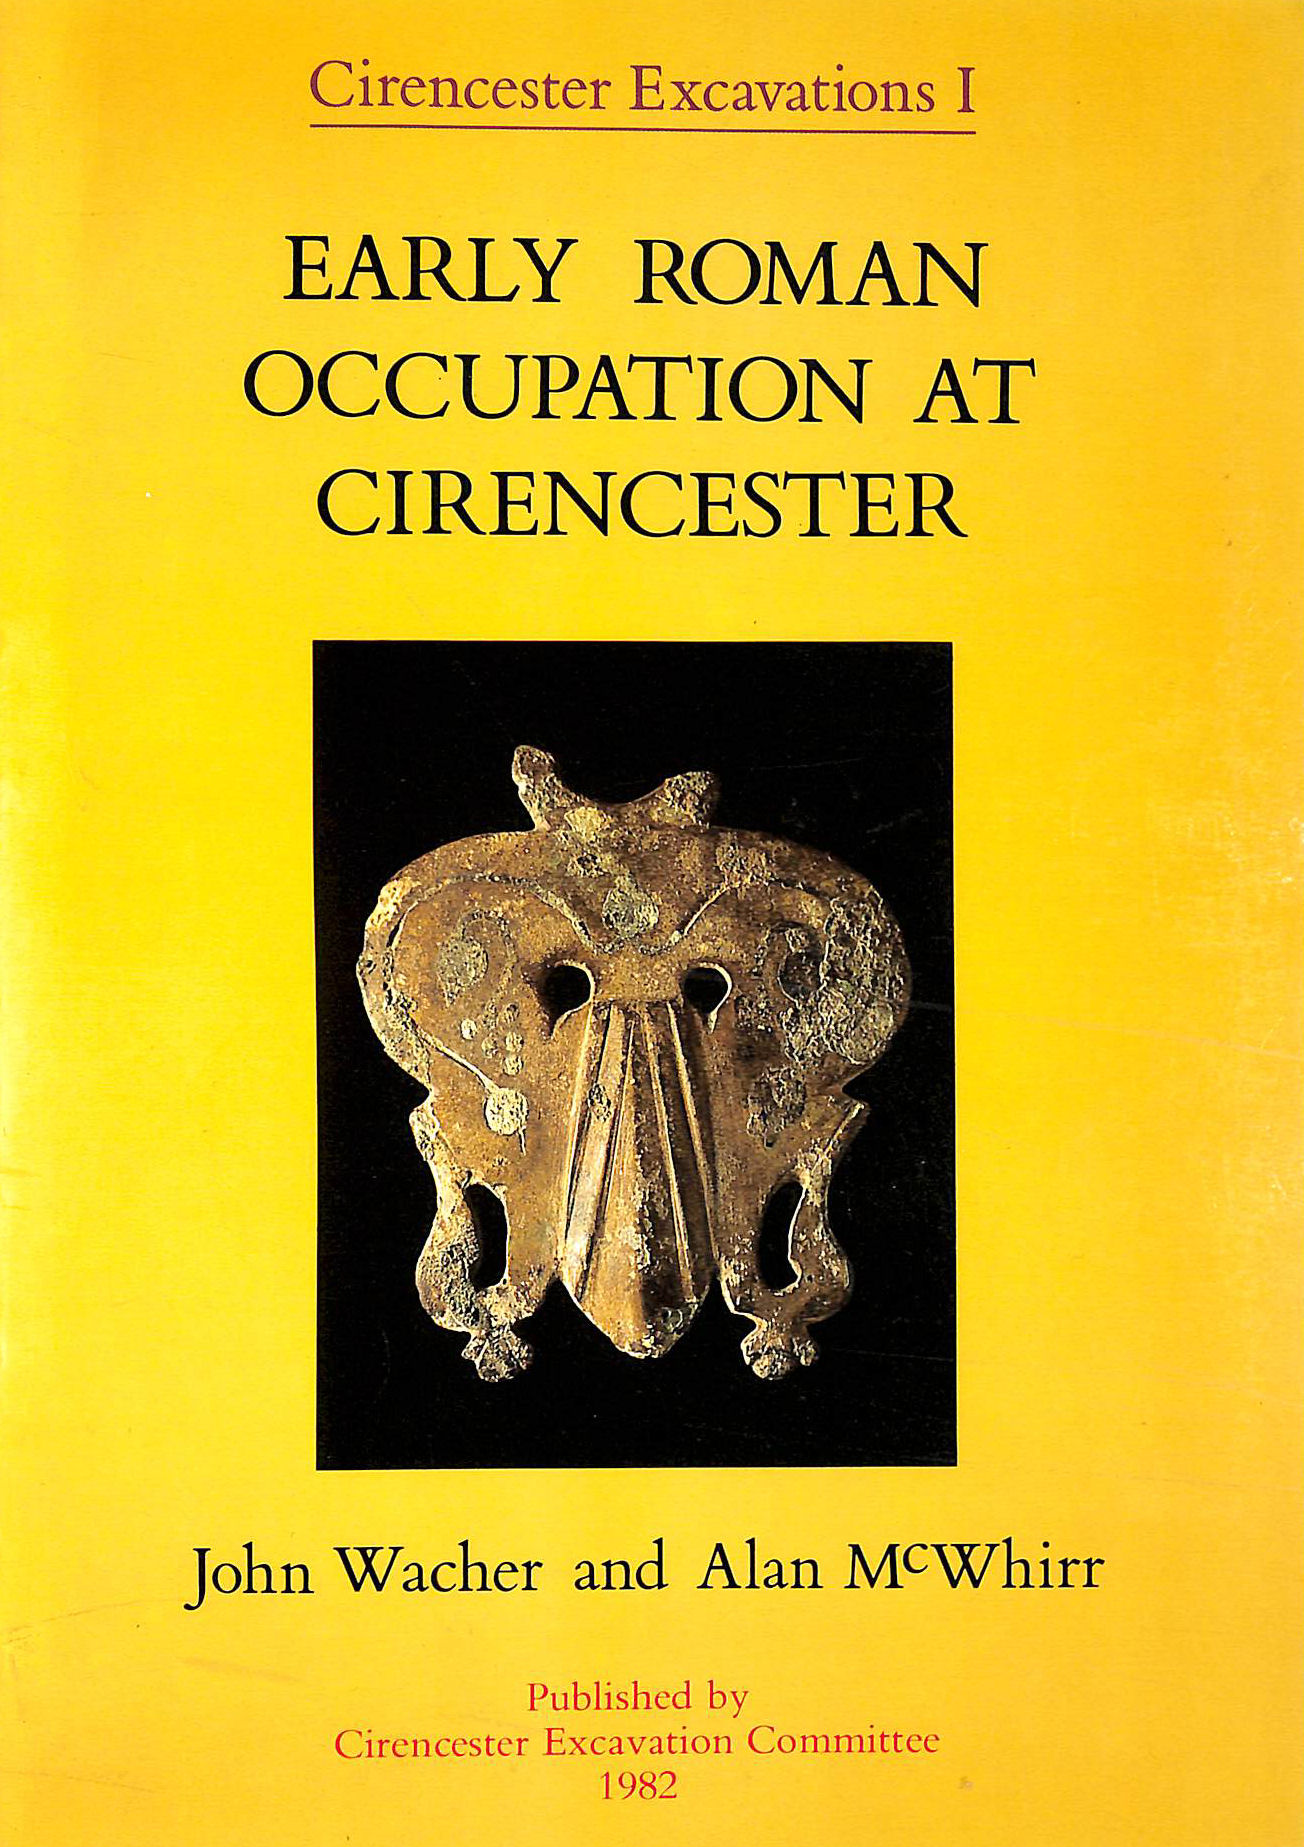 WACHER, JOHN; MCWHIRR, ALAN - Early Roman Occupation at Cirencester (Cirencester Excavations I)